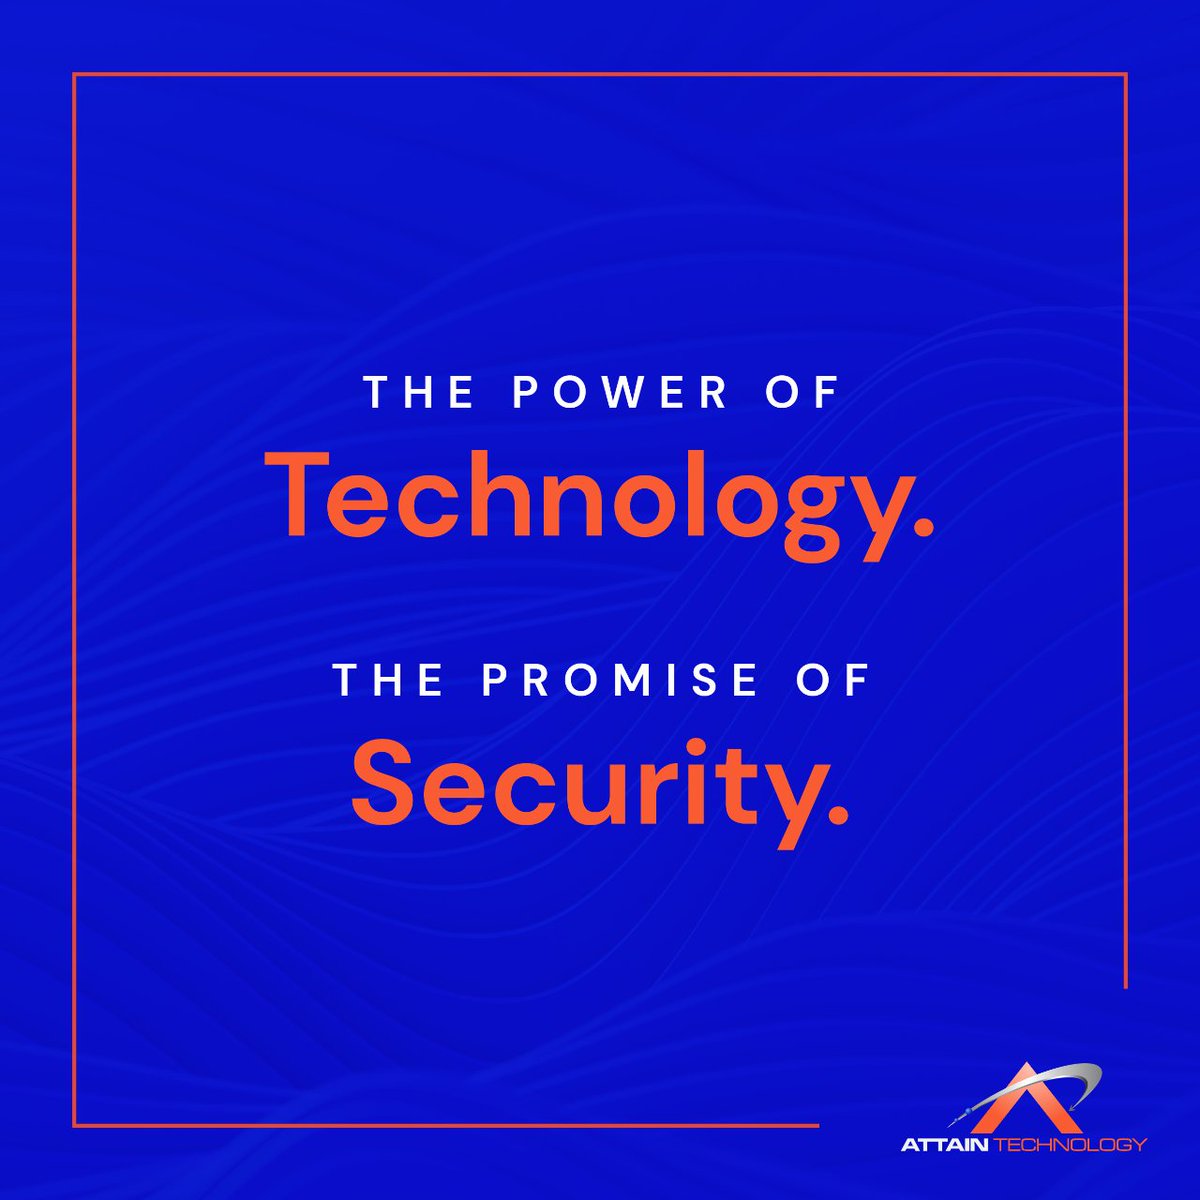 It’s no secret that technology is powerful. While it helps us communicate and analyze data, it also poses a huge security risk, and a #cybersecurityteam is essential in protecting your data from hackers and cybercriminals.  

Learn more: attaintechnology.com/cybersecurity/